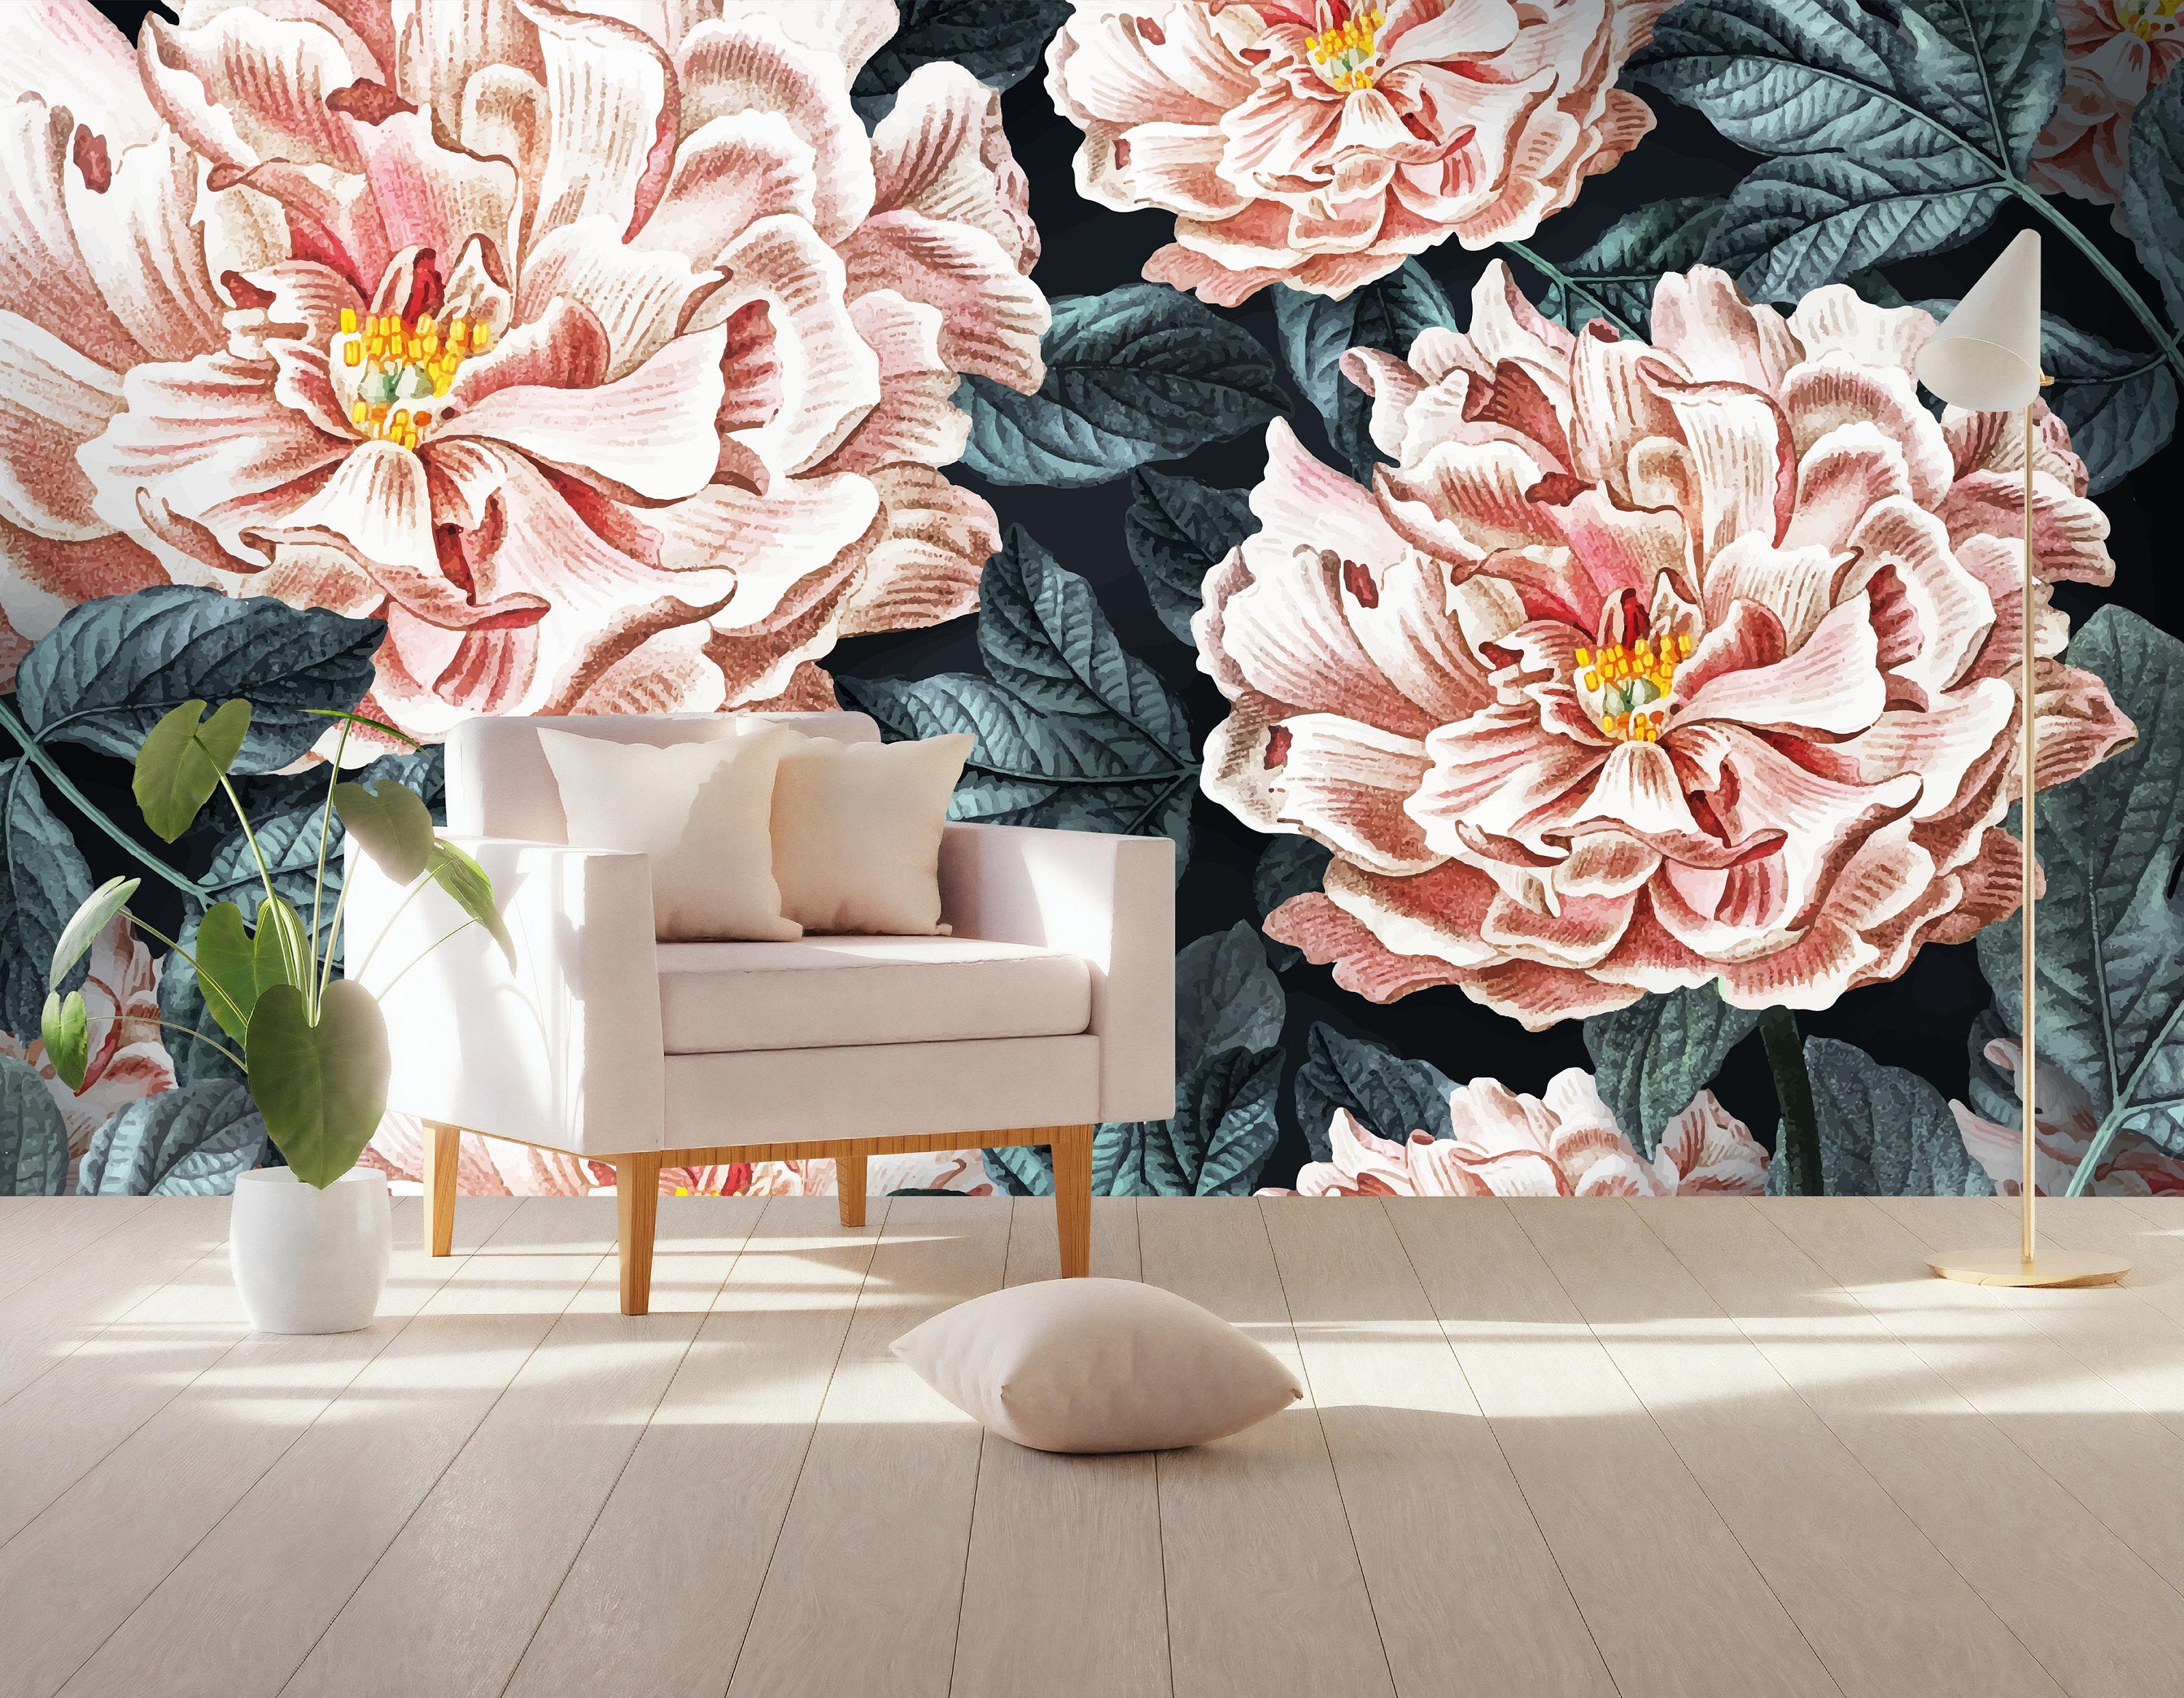 Pinkish Garden Flowers Decorative Luxury Floral Background Wallpaper Self Adhesive Peel and Stick Wall Sticker Wall Decoration Removable